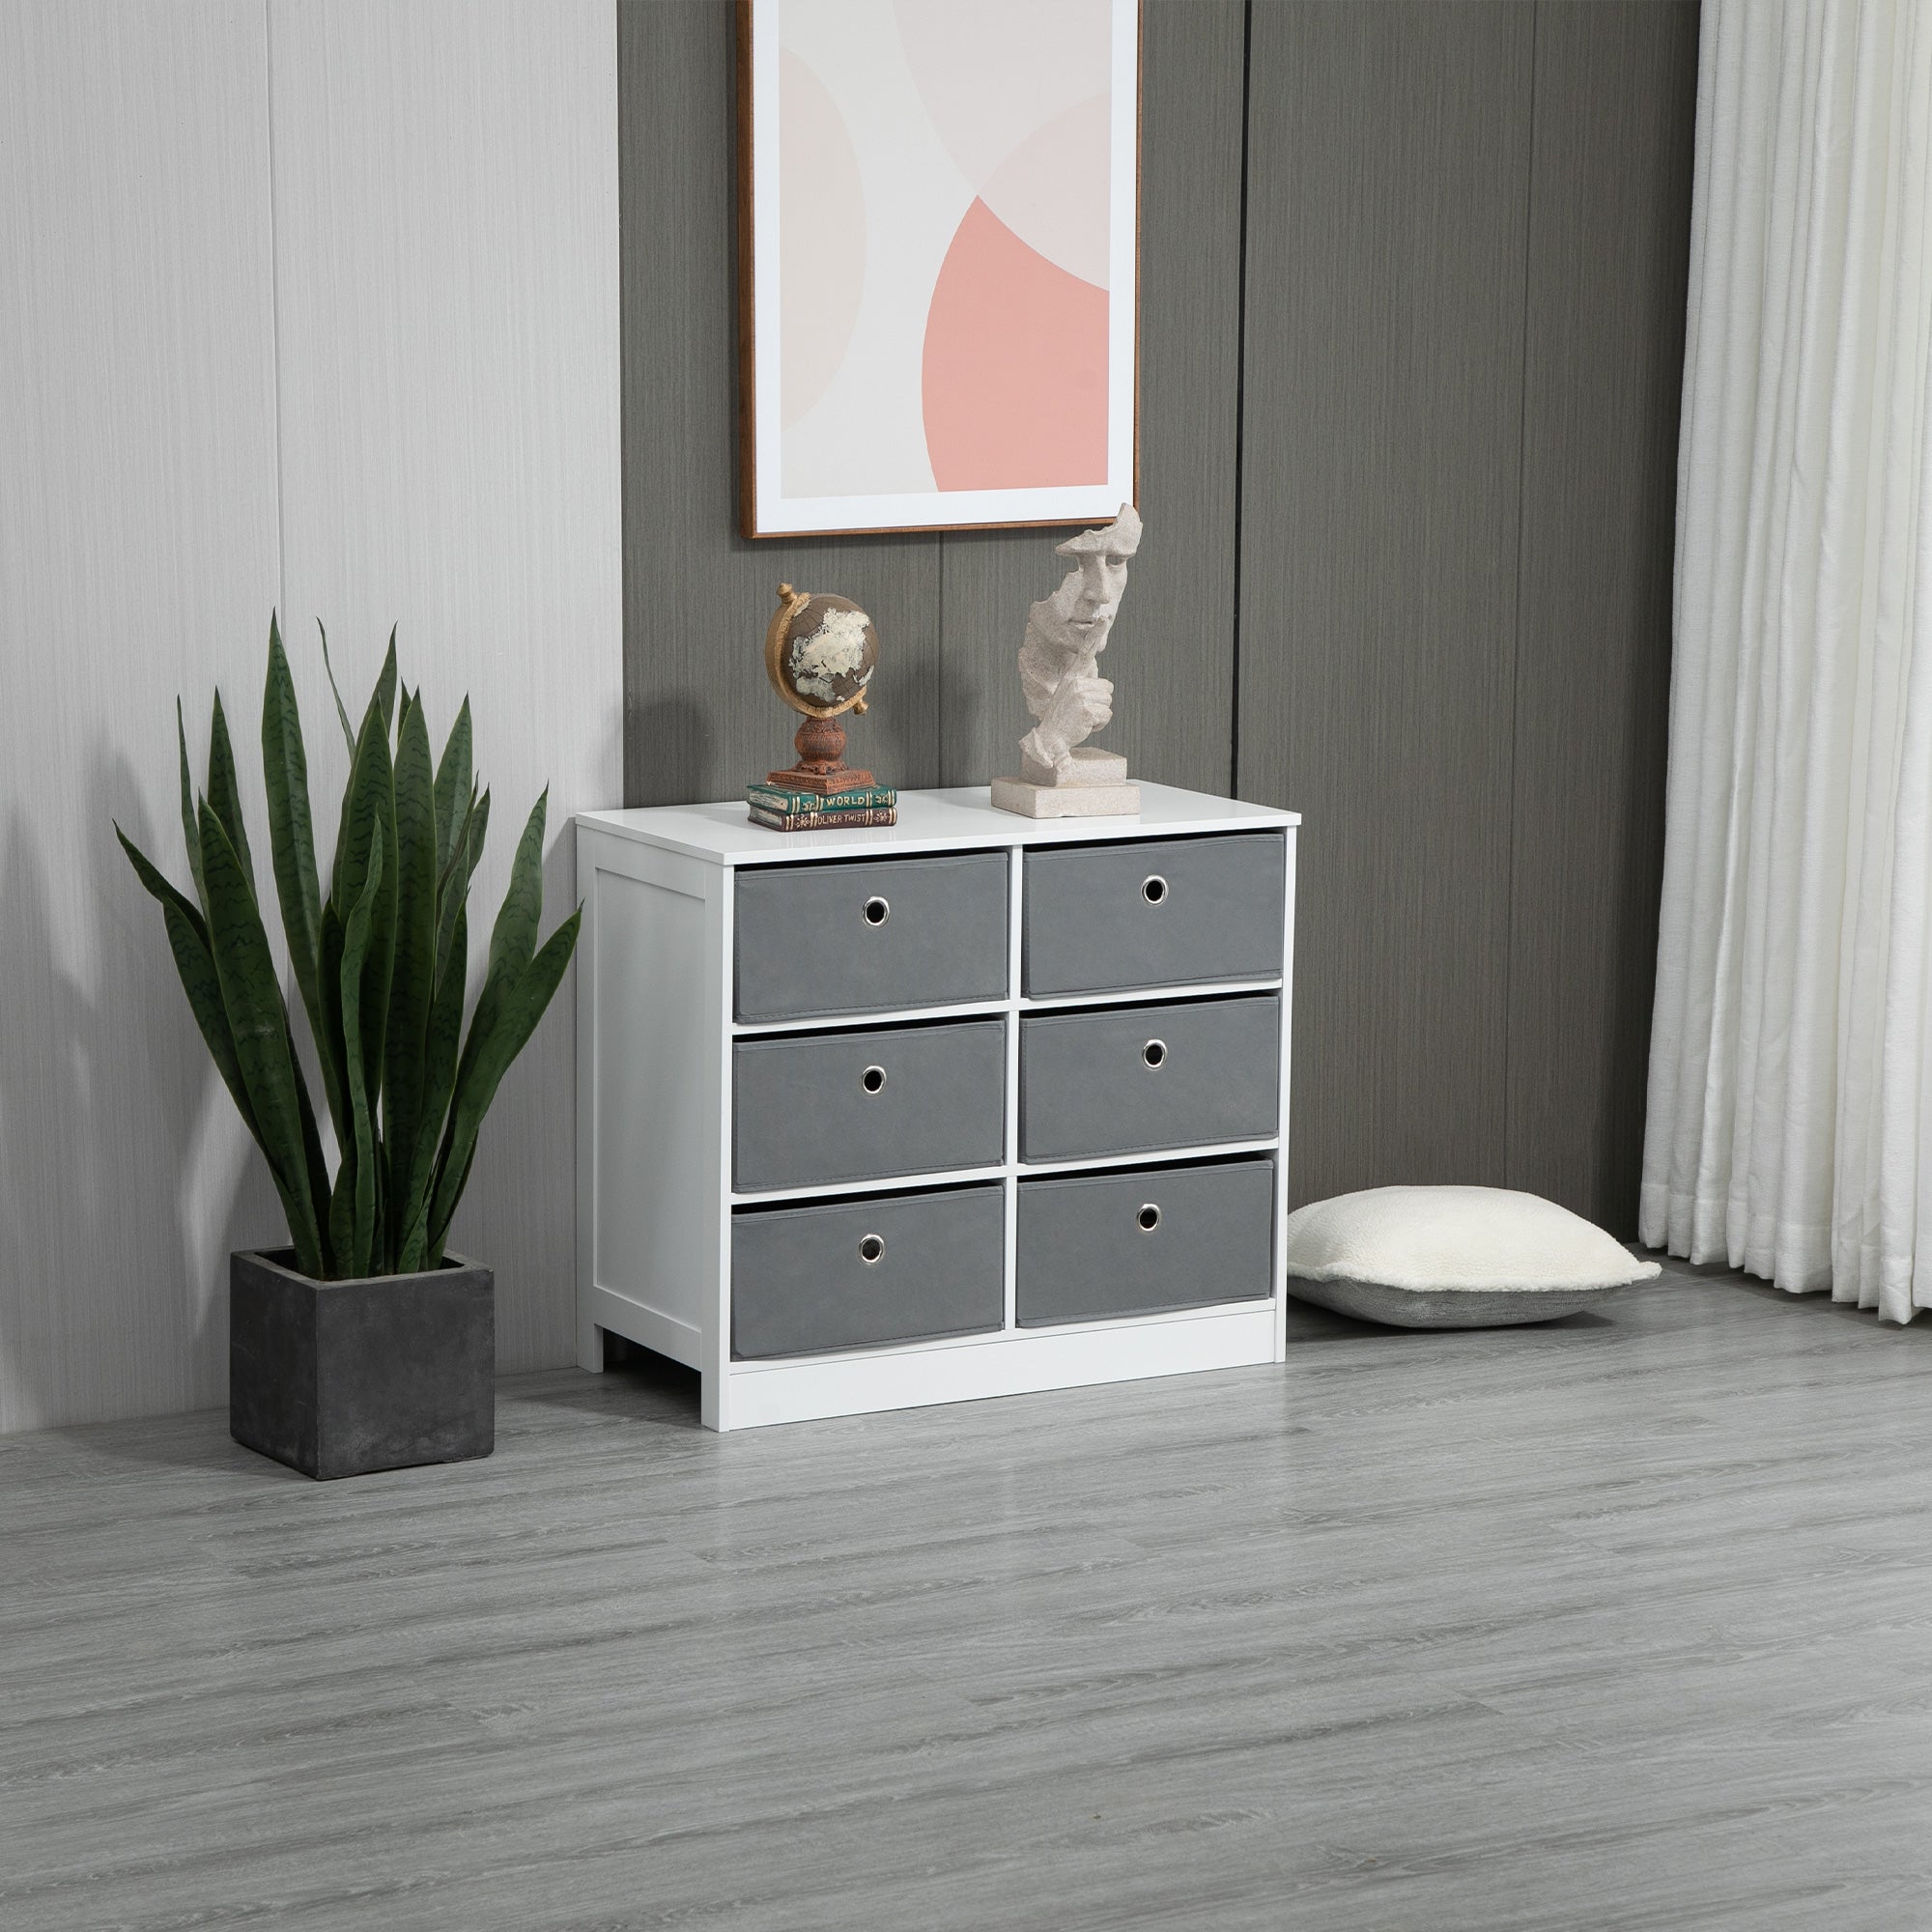 HOMCOM Chests of Drawer, Fabric Dresser Storage Cabinet with 6 Drawers for Bedroom, Living Room and Hallway, White and Grey - Inspirely